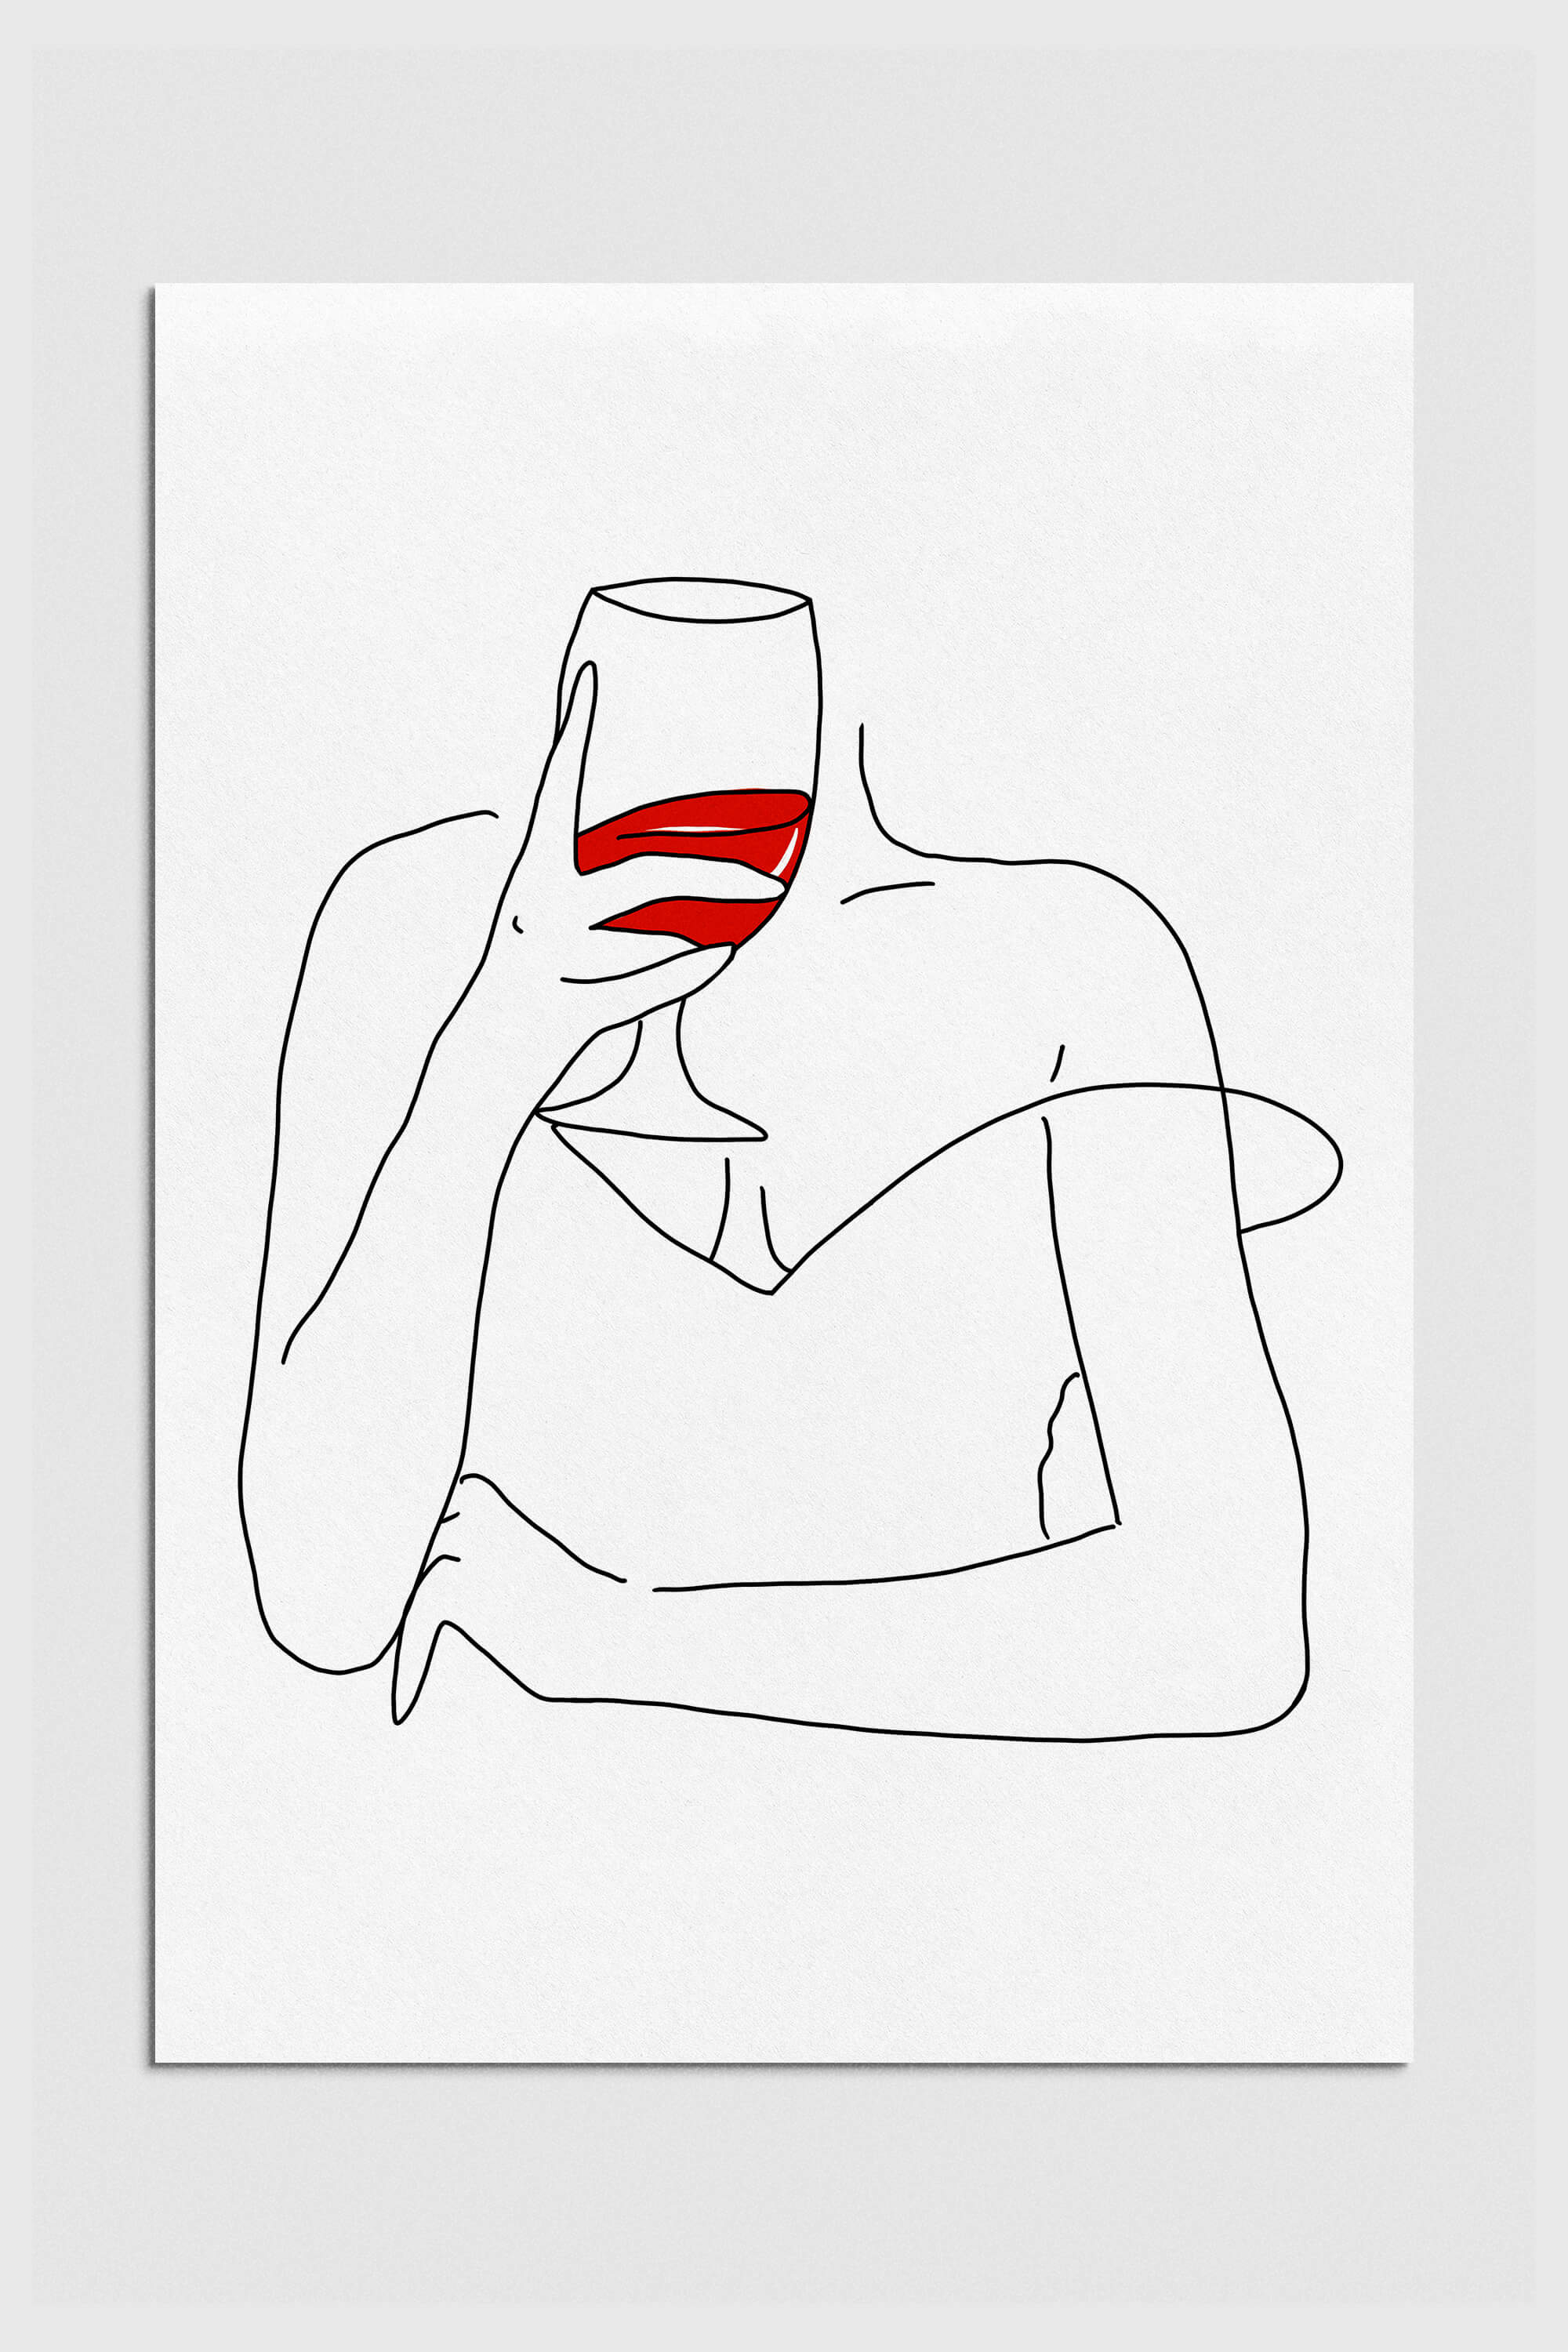 Minimalist line art of a woman's hands holding a wine glass, capturing the elegance of wine appreciation.